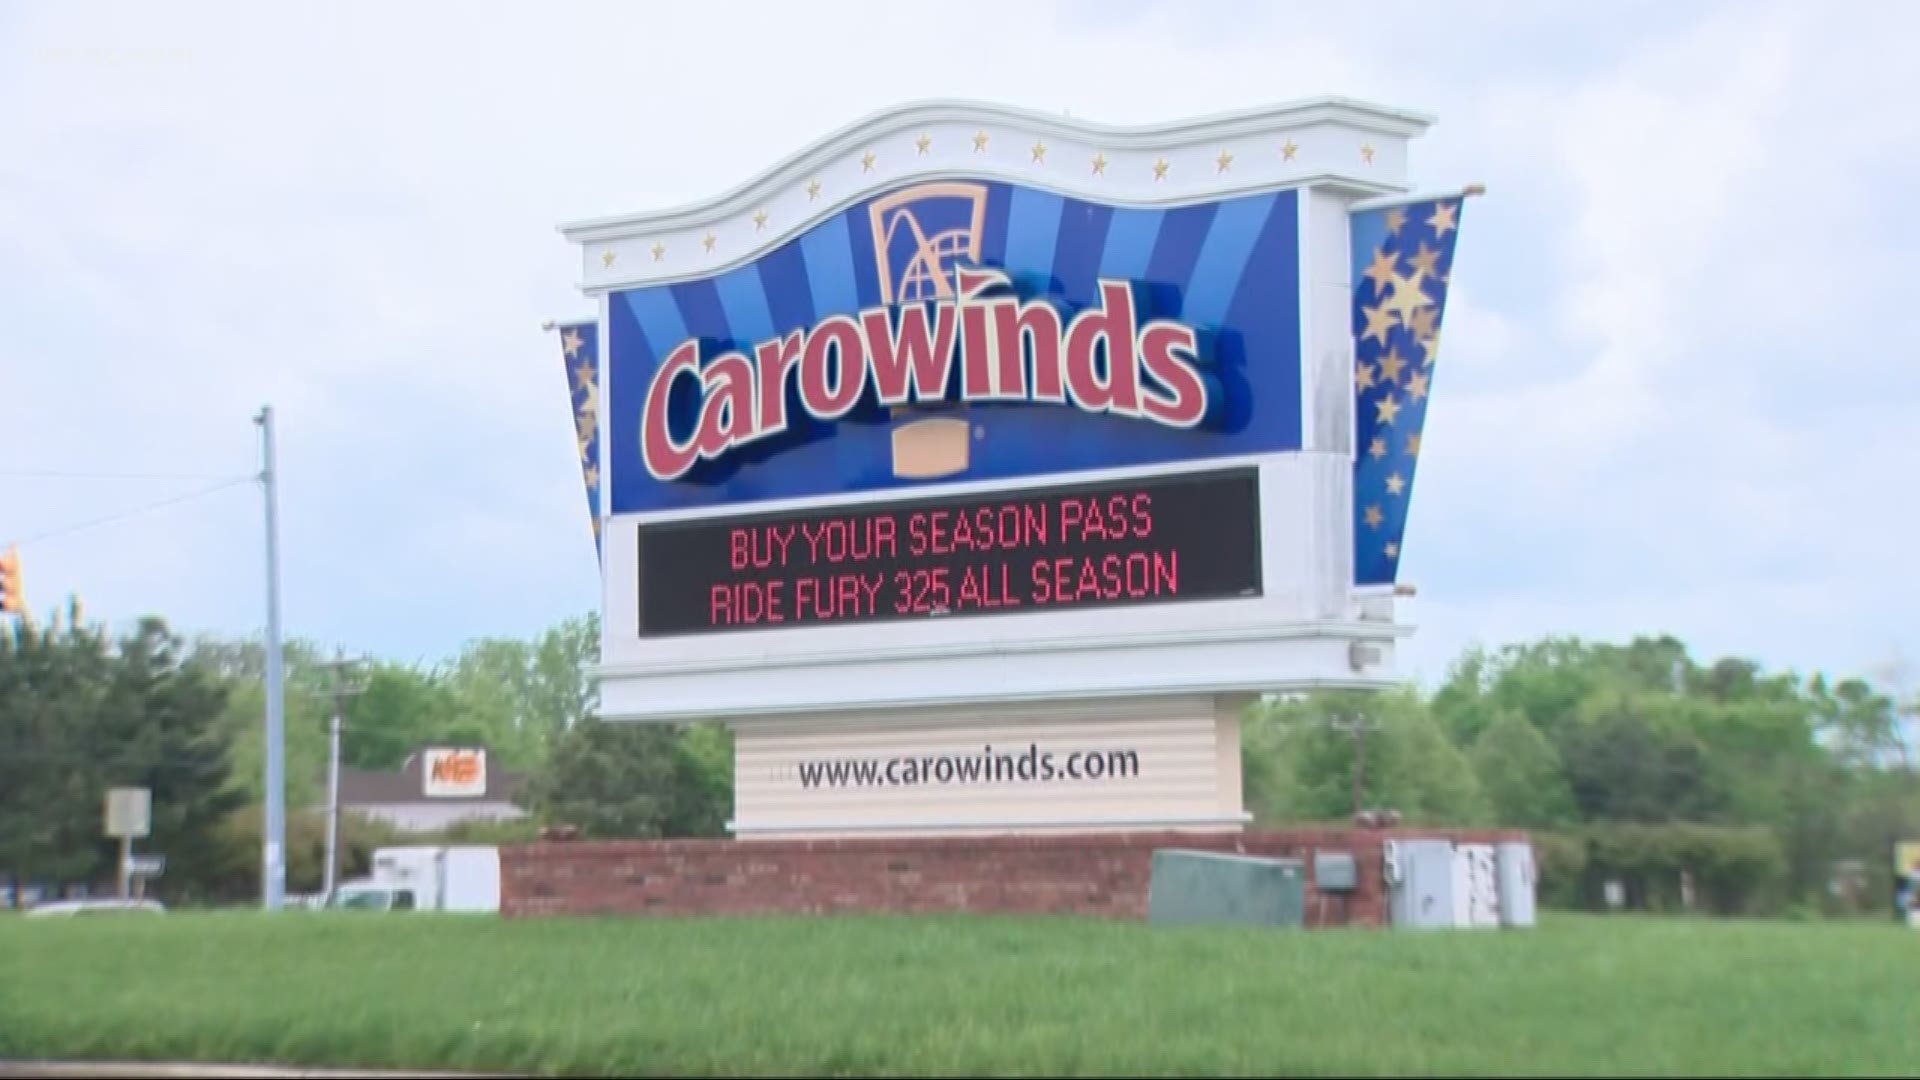 In other news: Carowinds among most affordable theme parks